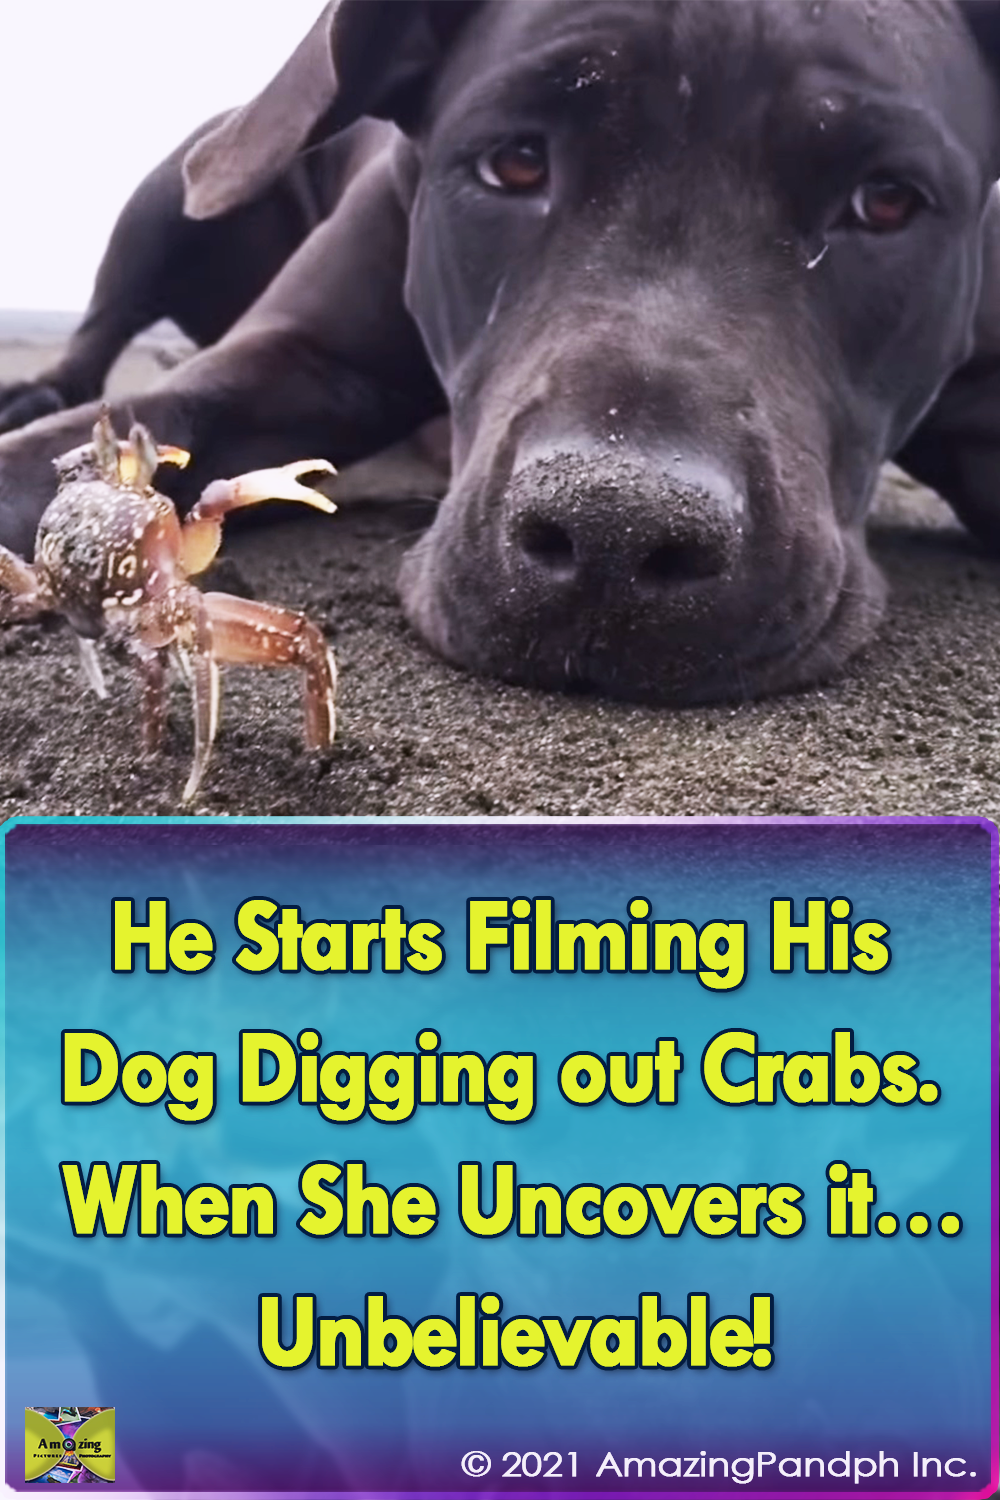 dogs, crabs, beach, cute, adorable, digging, playing, amazing, labrador,